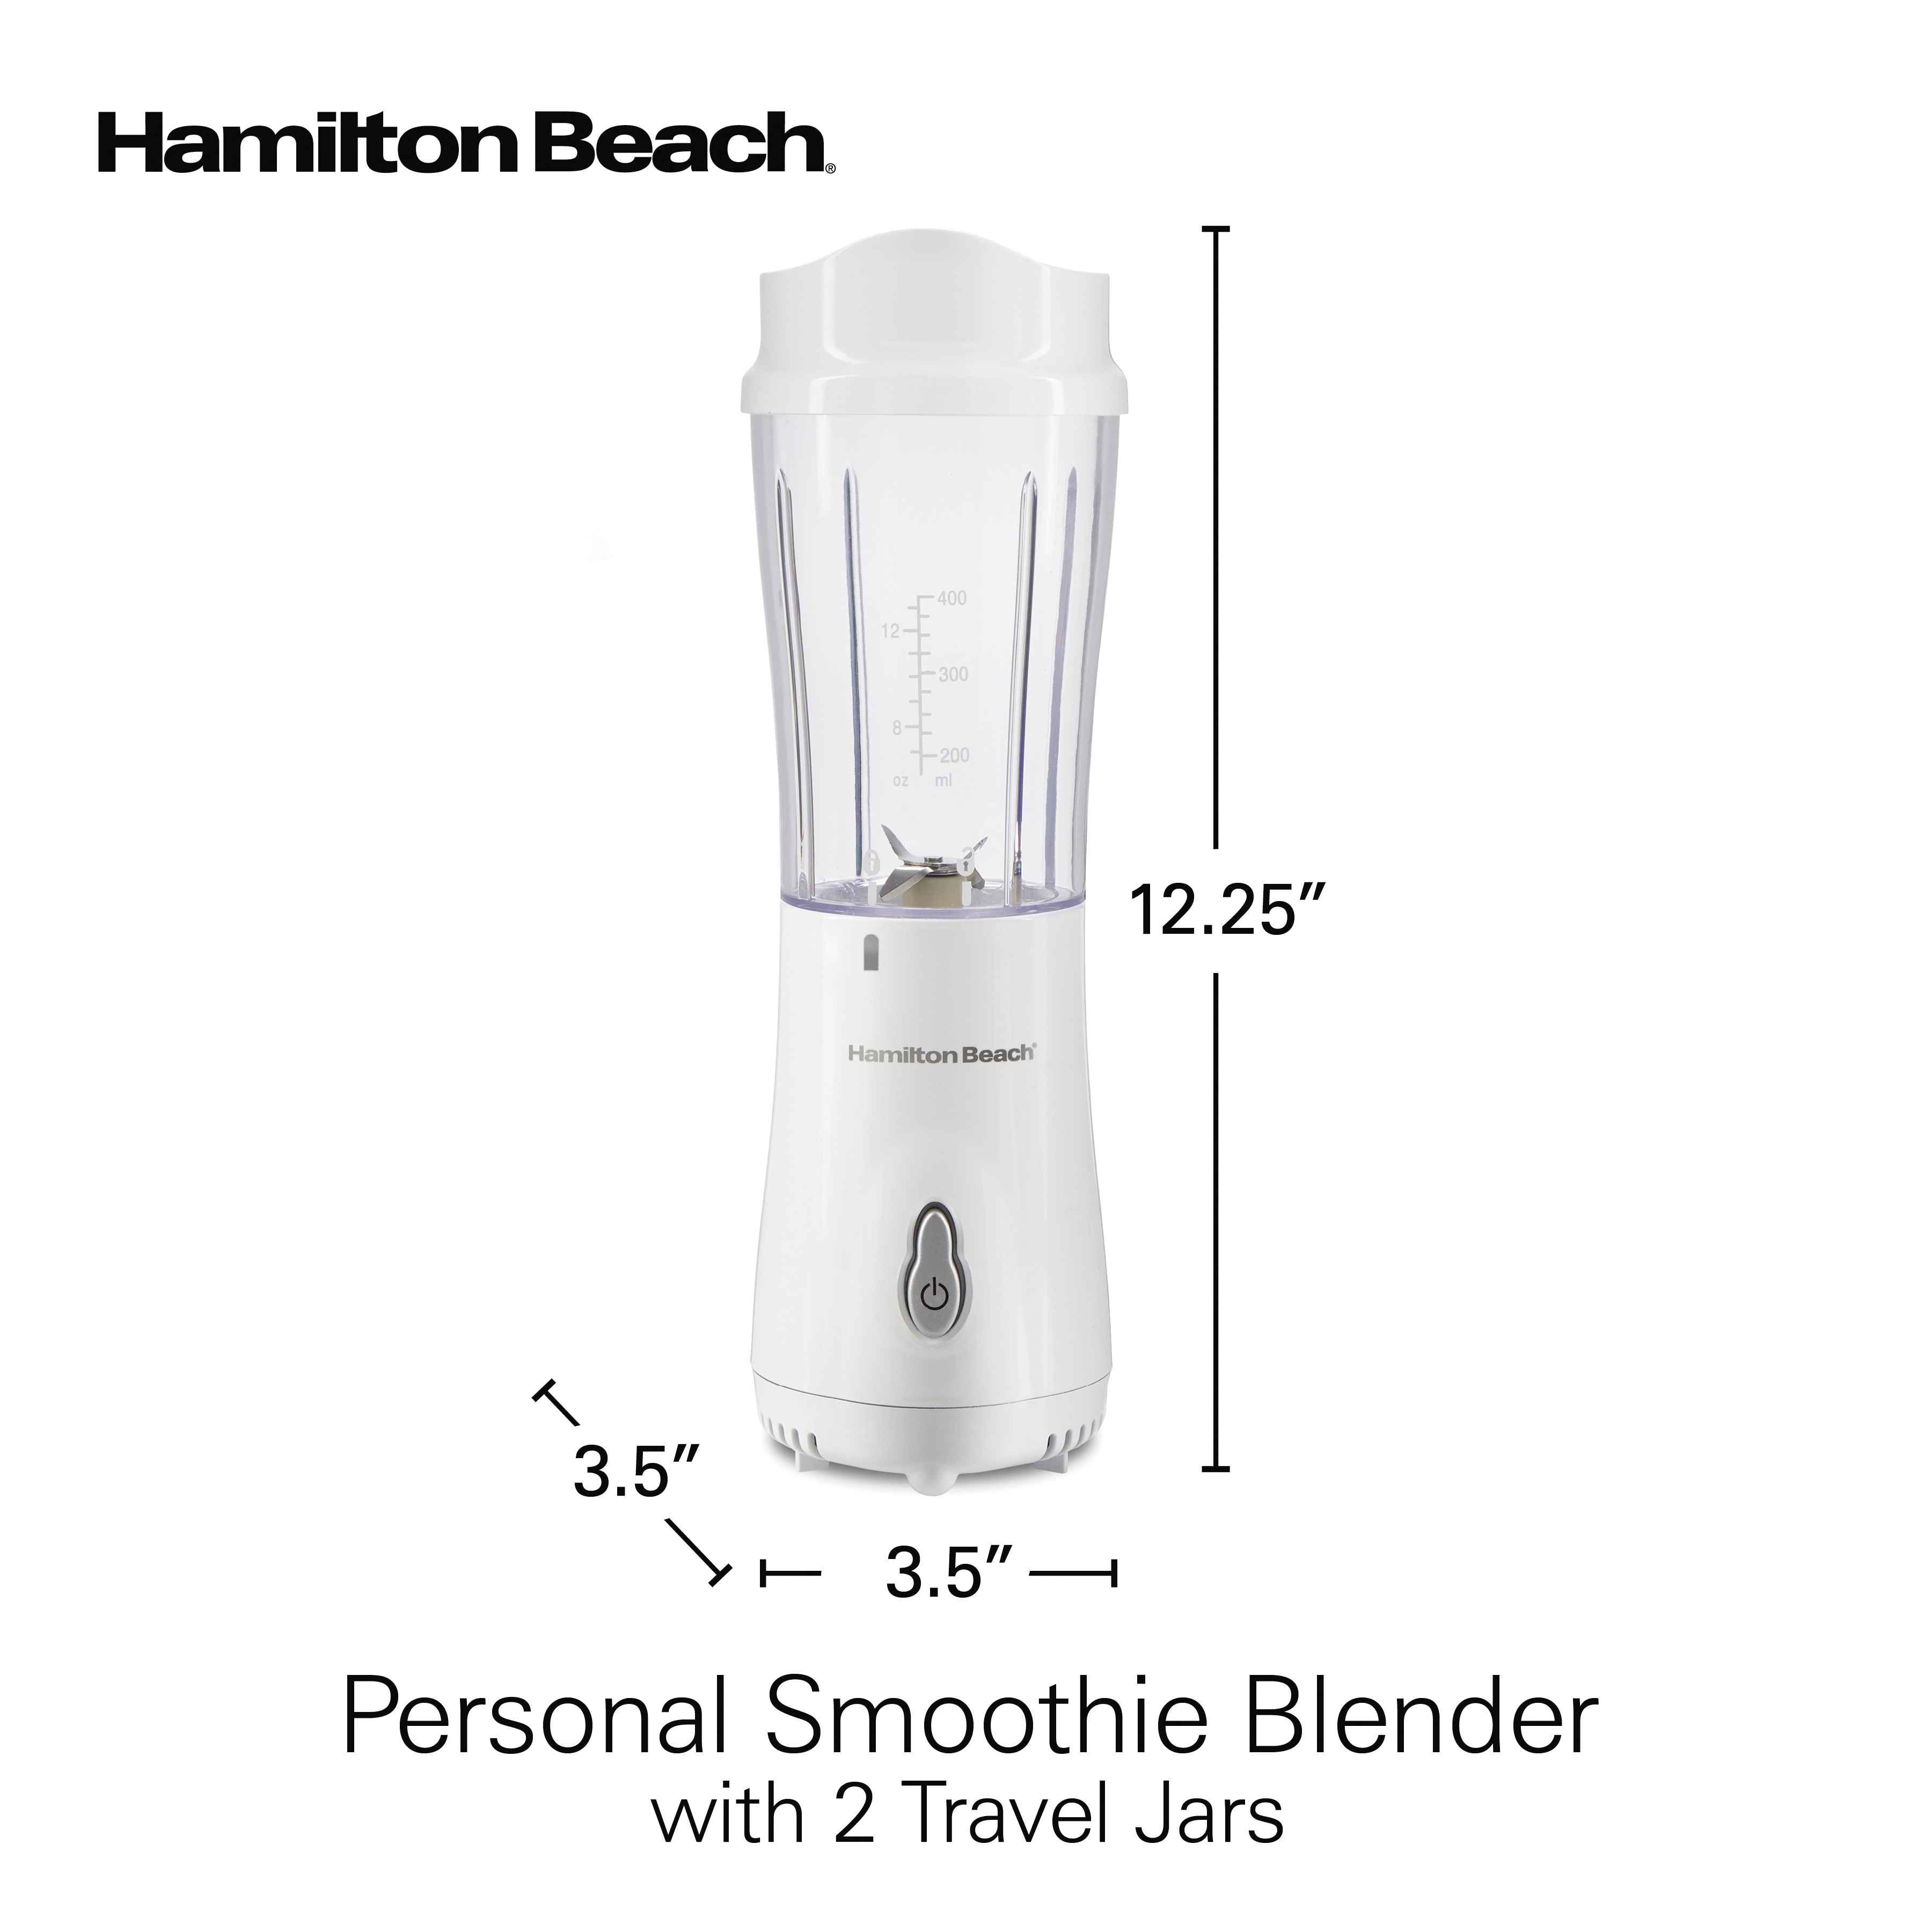 Hamilton Beach Smoothie Blender with 2 Travel Jars and 2 Lids, White 51102V - image 8 of 8